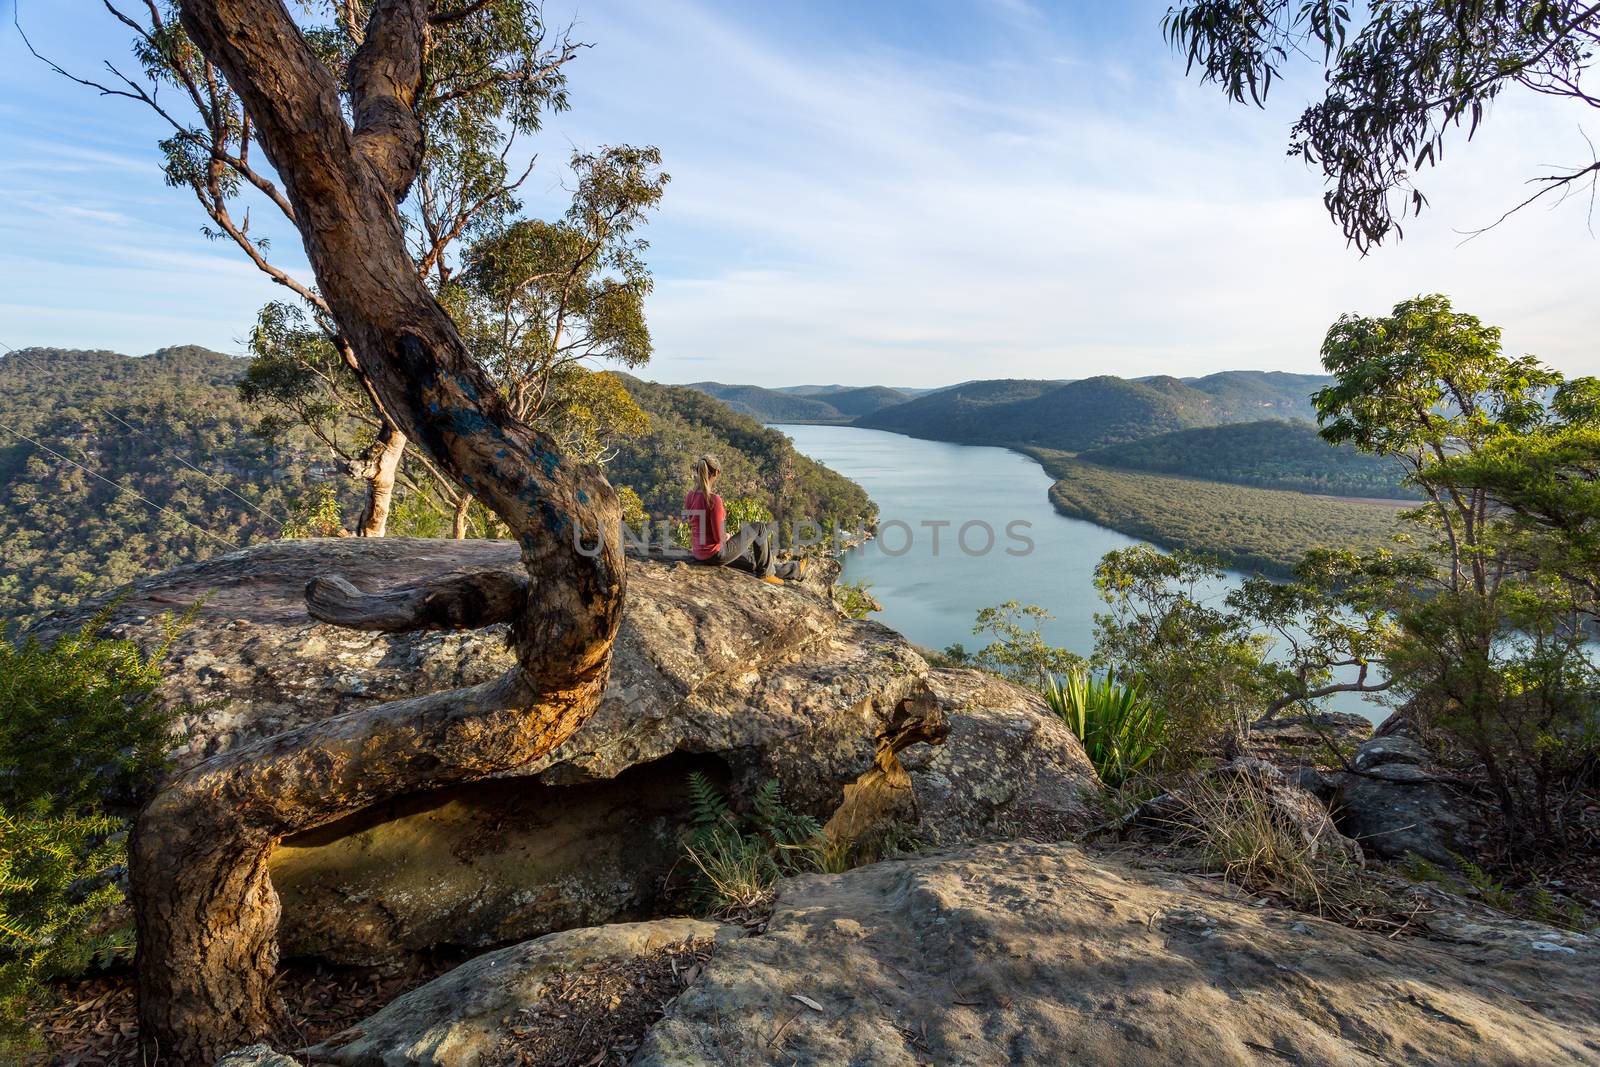 Female sitting on a large rock relaxing in afternoon dappled light the Australian bushland with views over the river